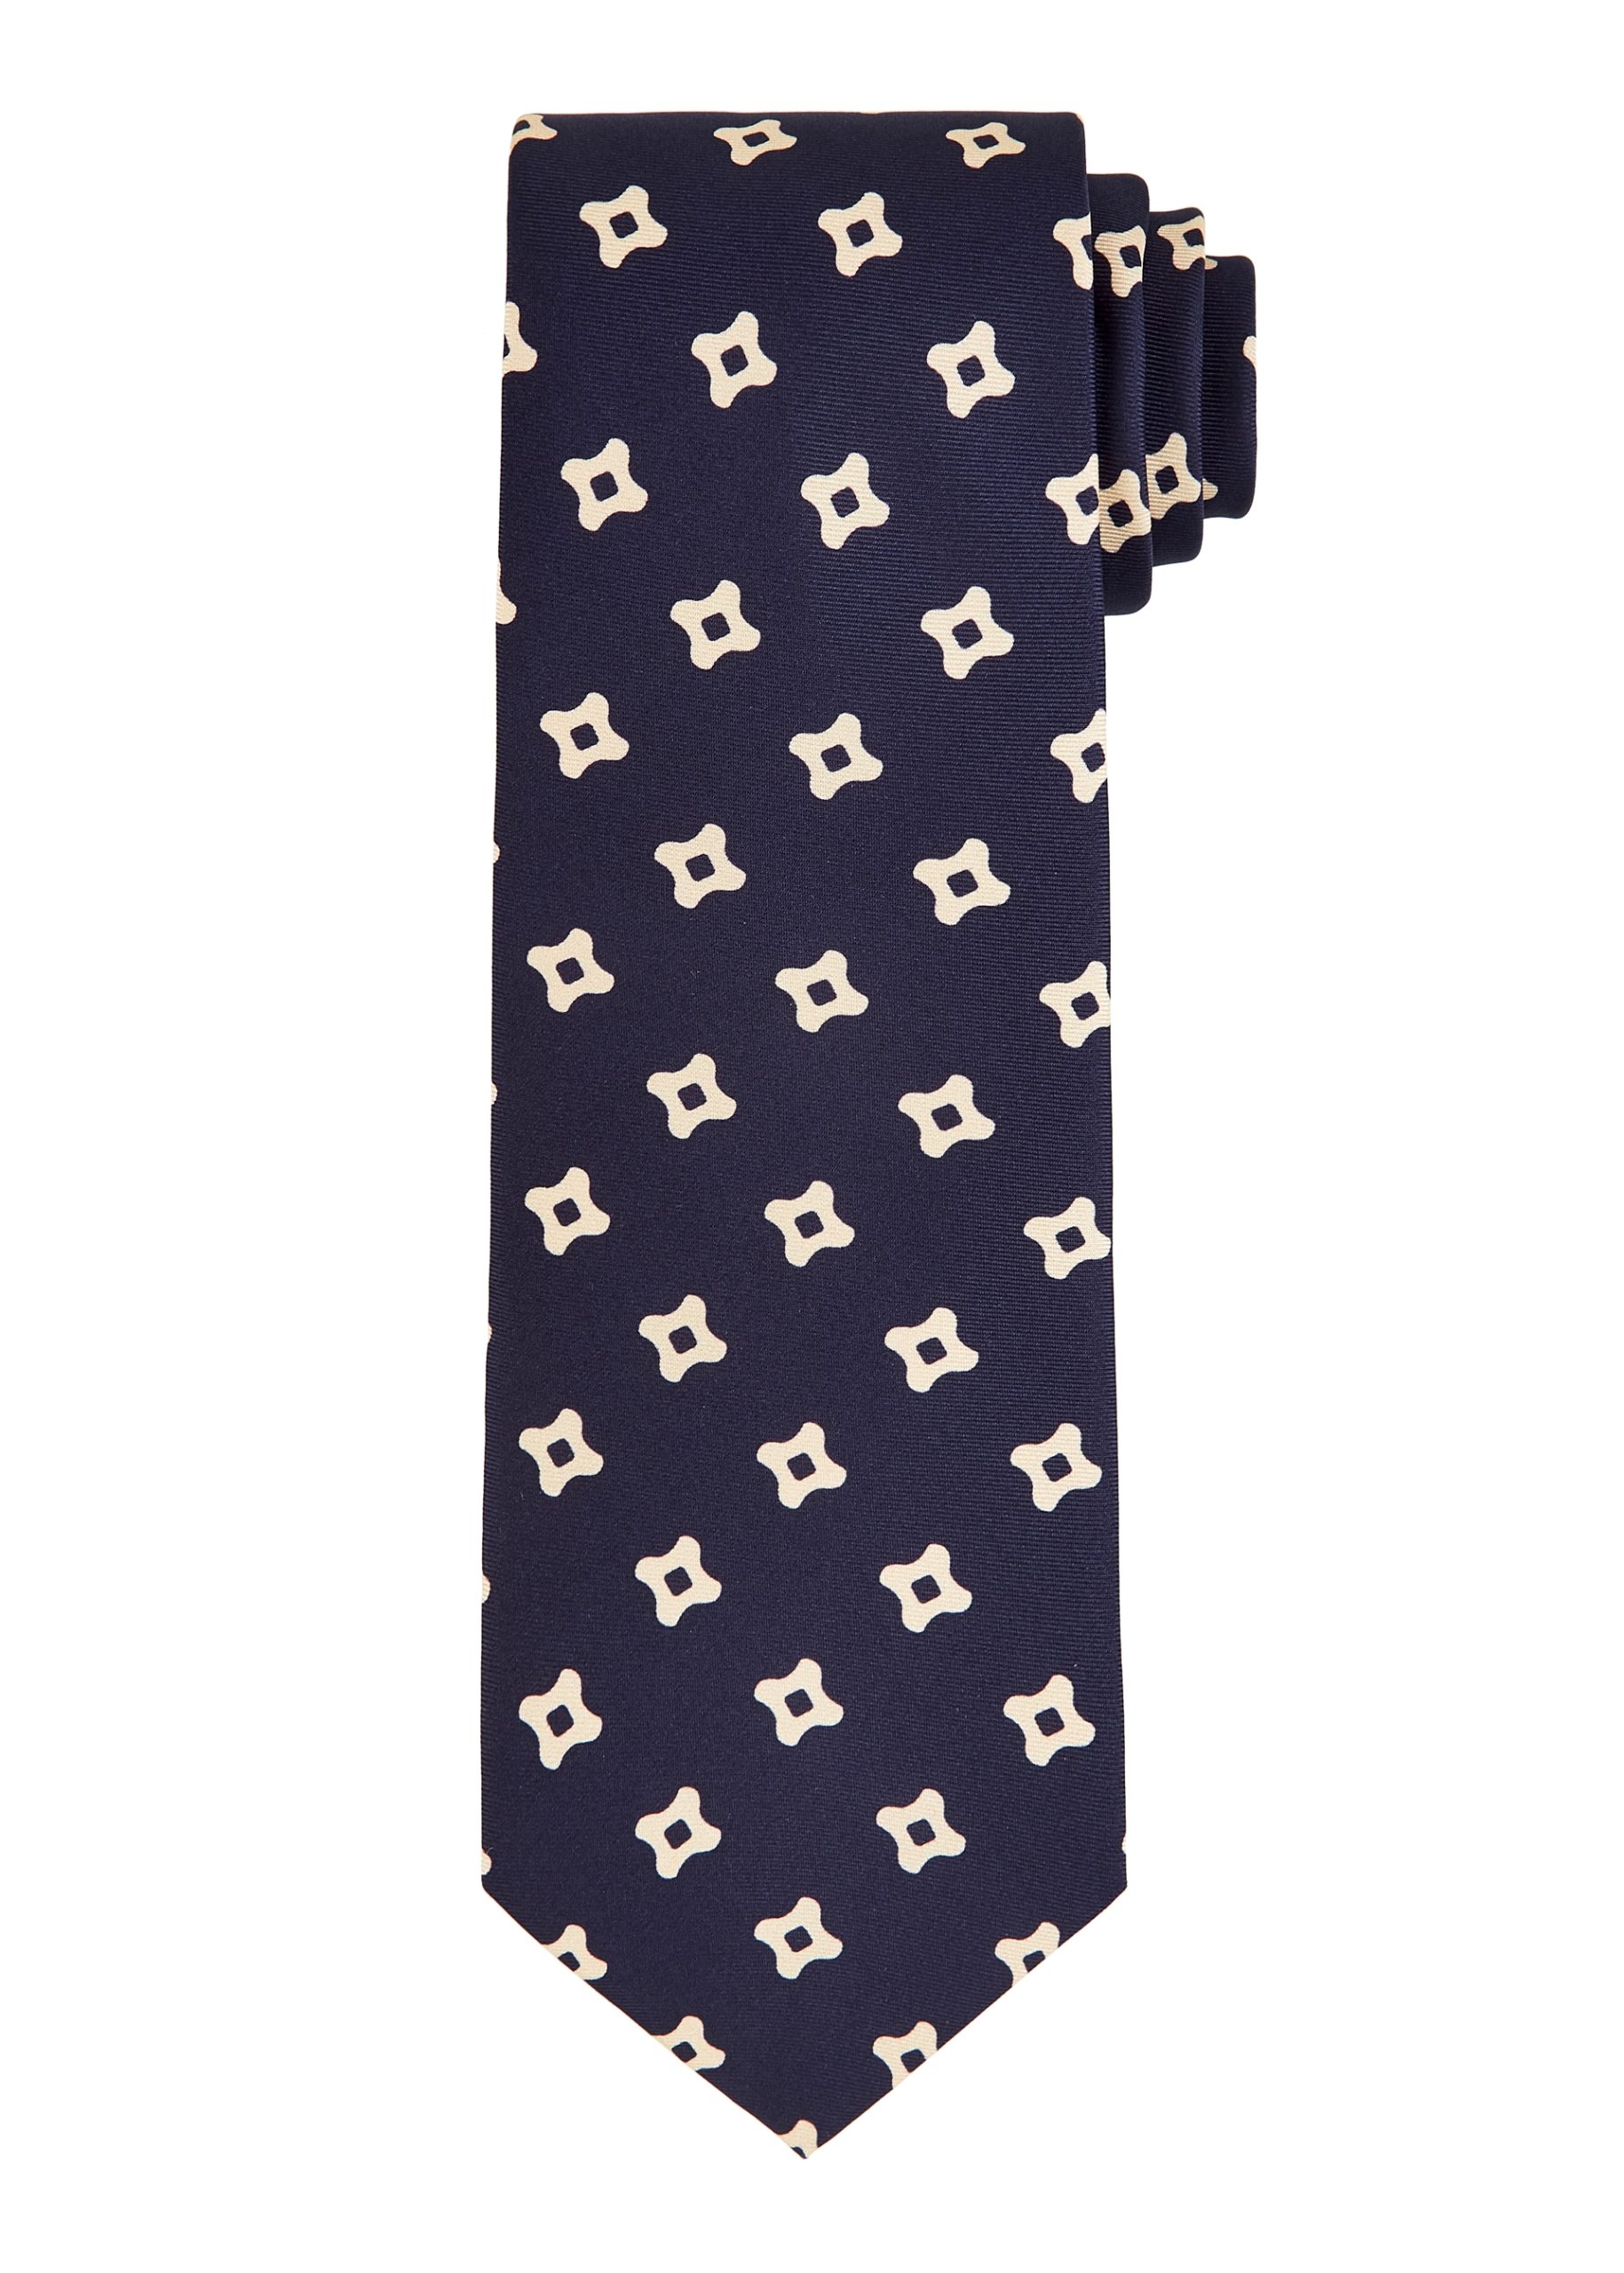 A navy men’s silk business tie with square pattern.